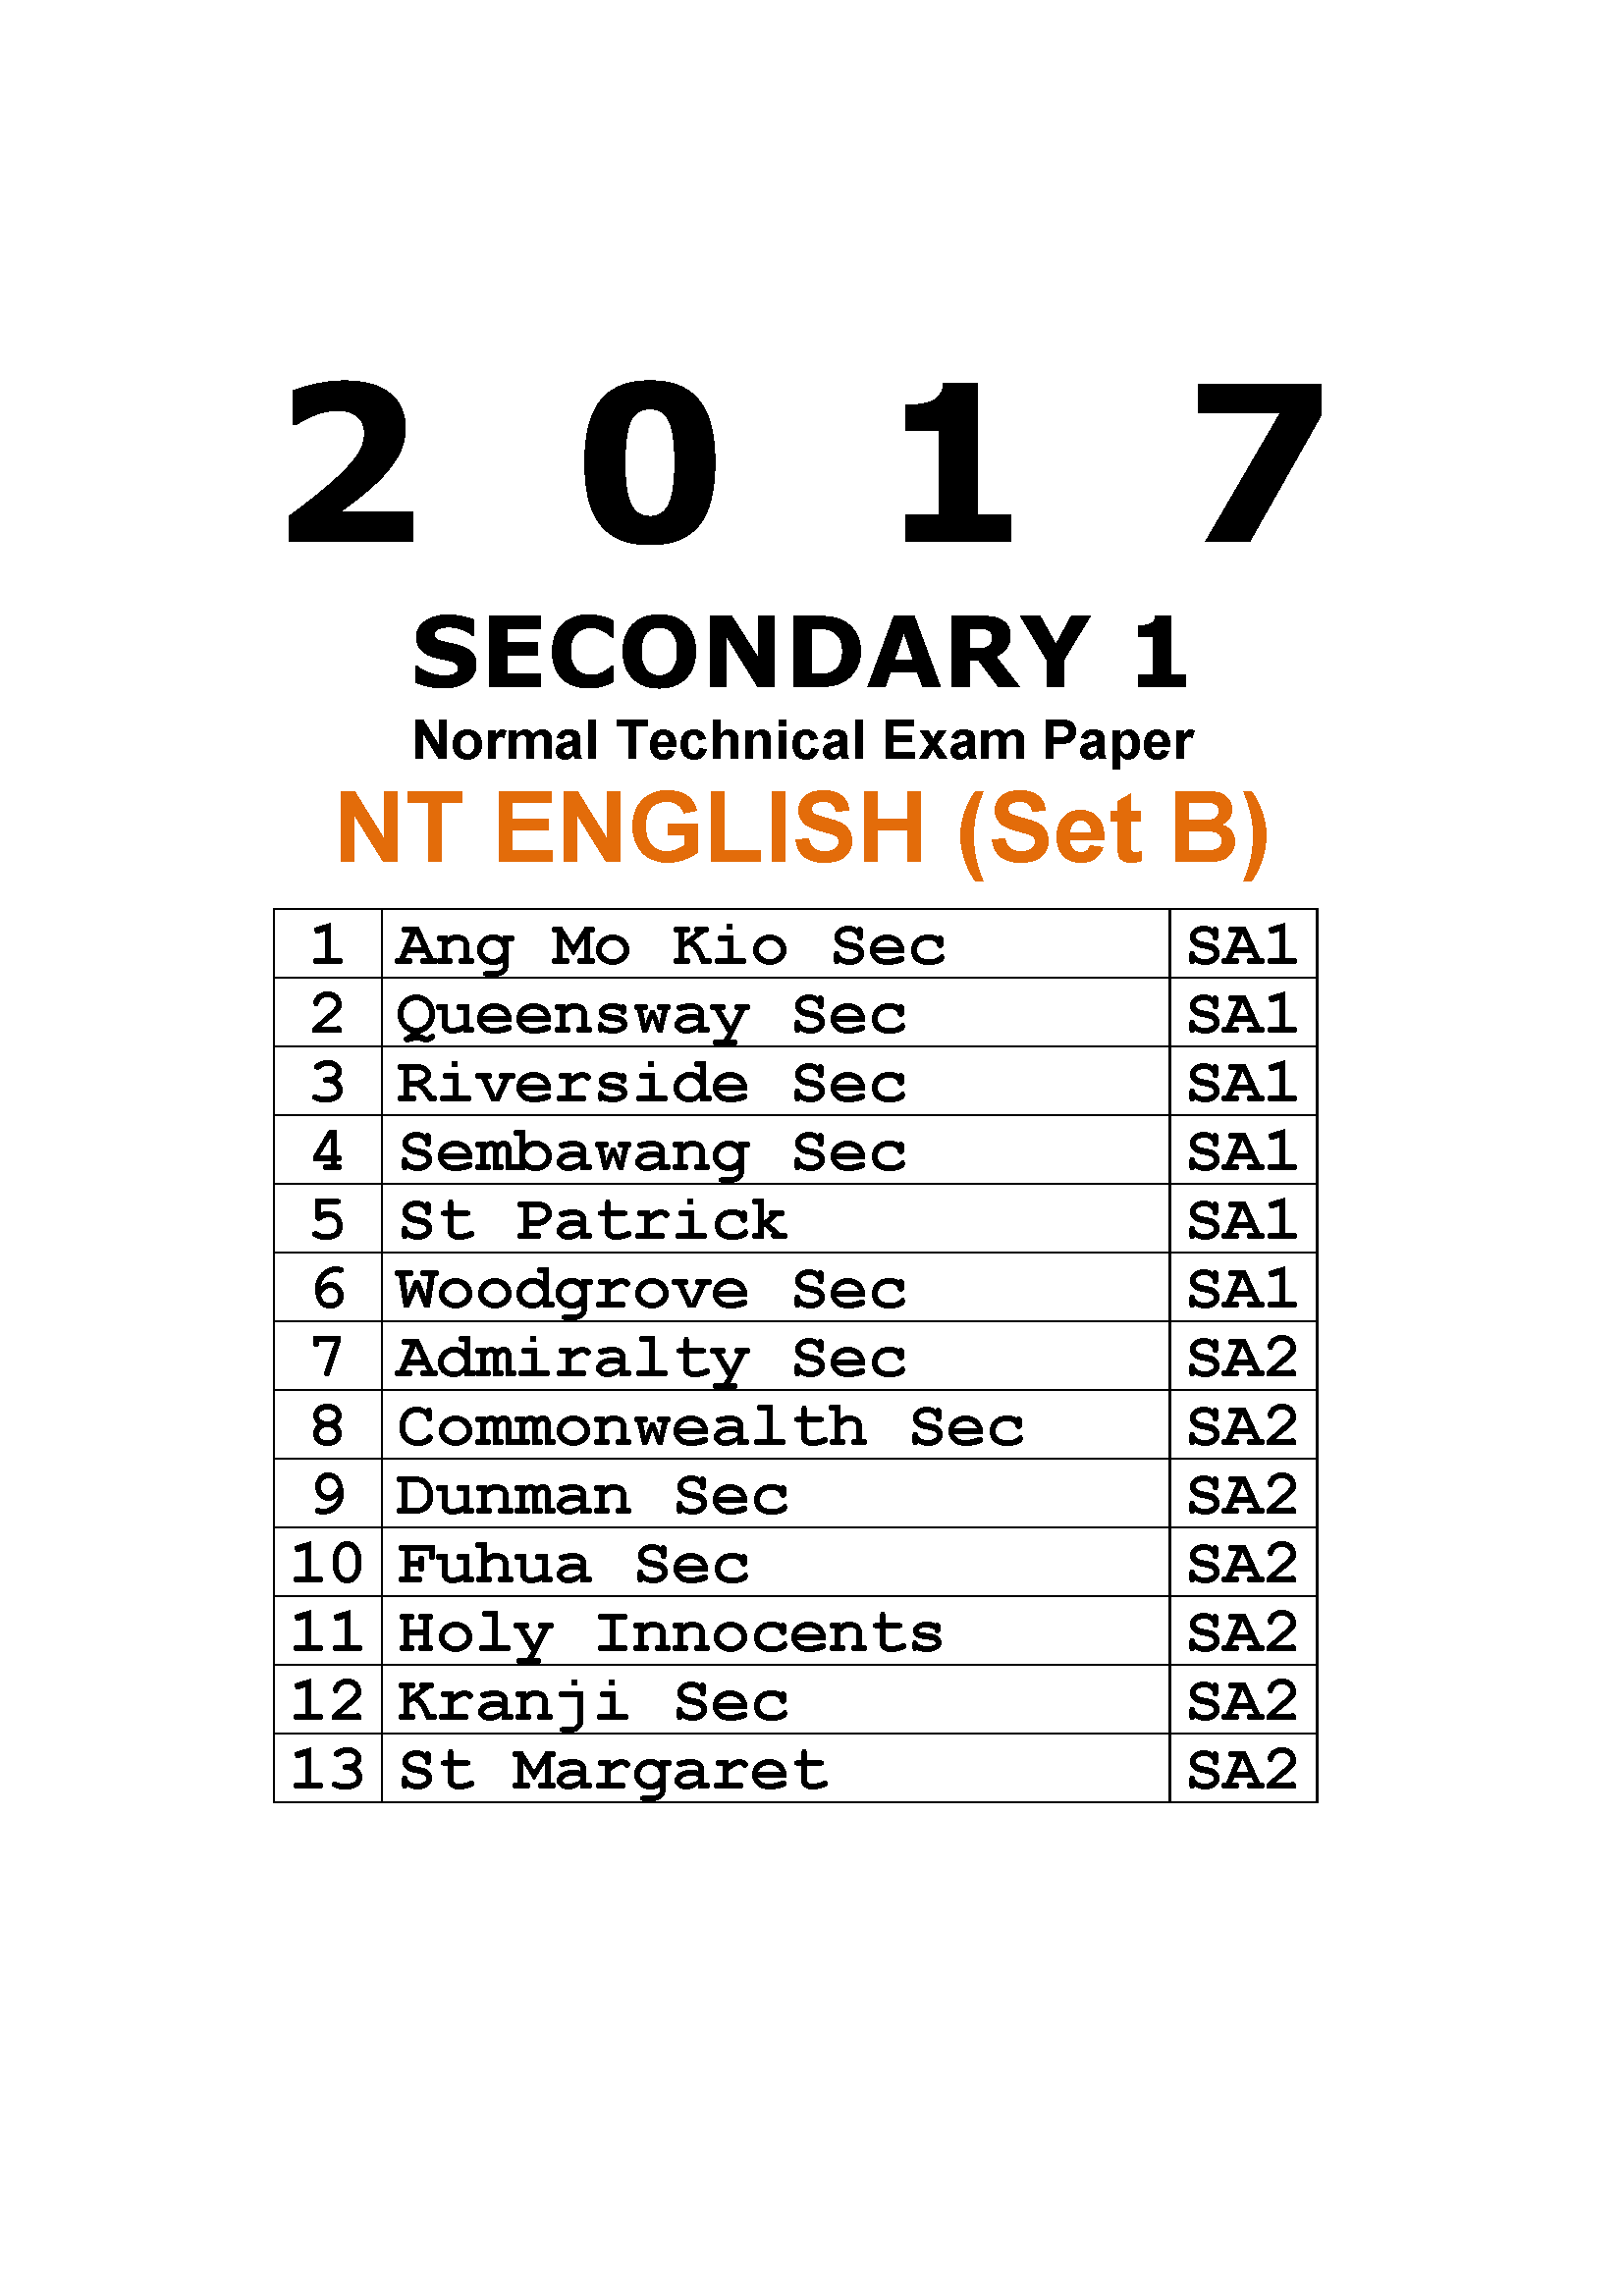 2017 Secondary 1 Normal Technical (NT) English Exam Paper (Set B